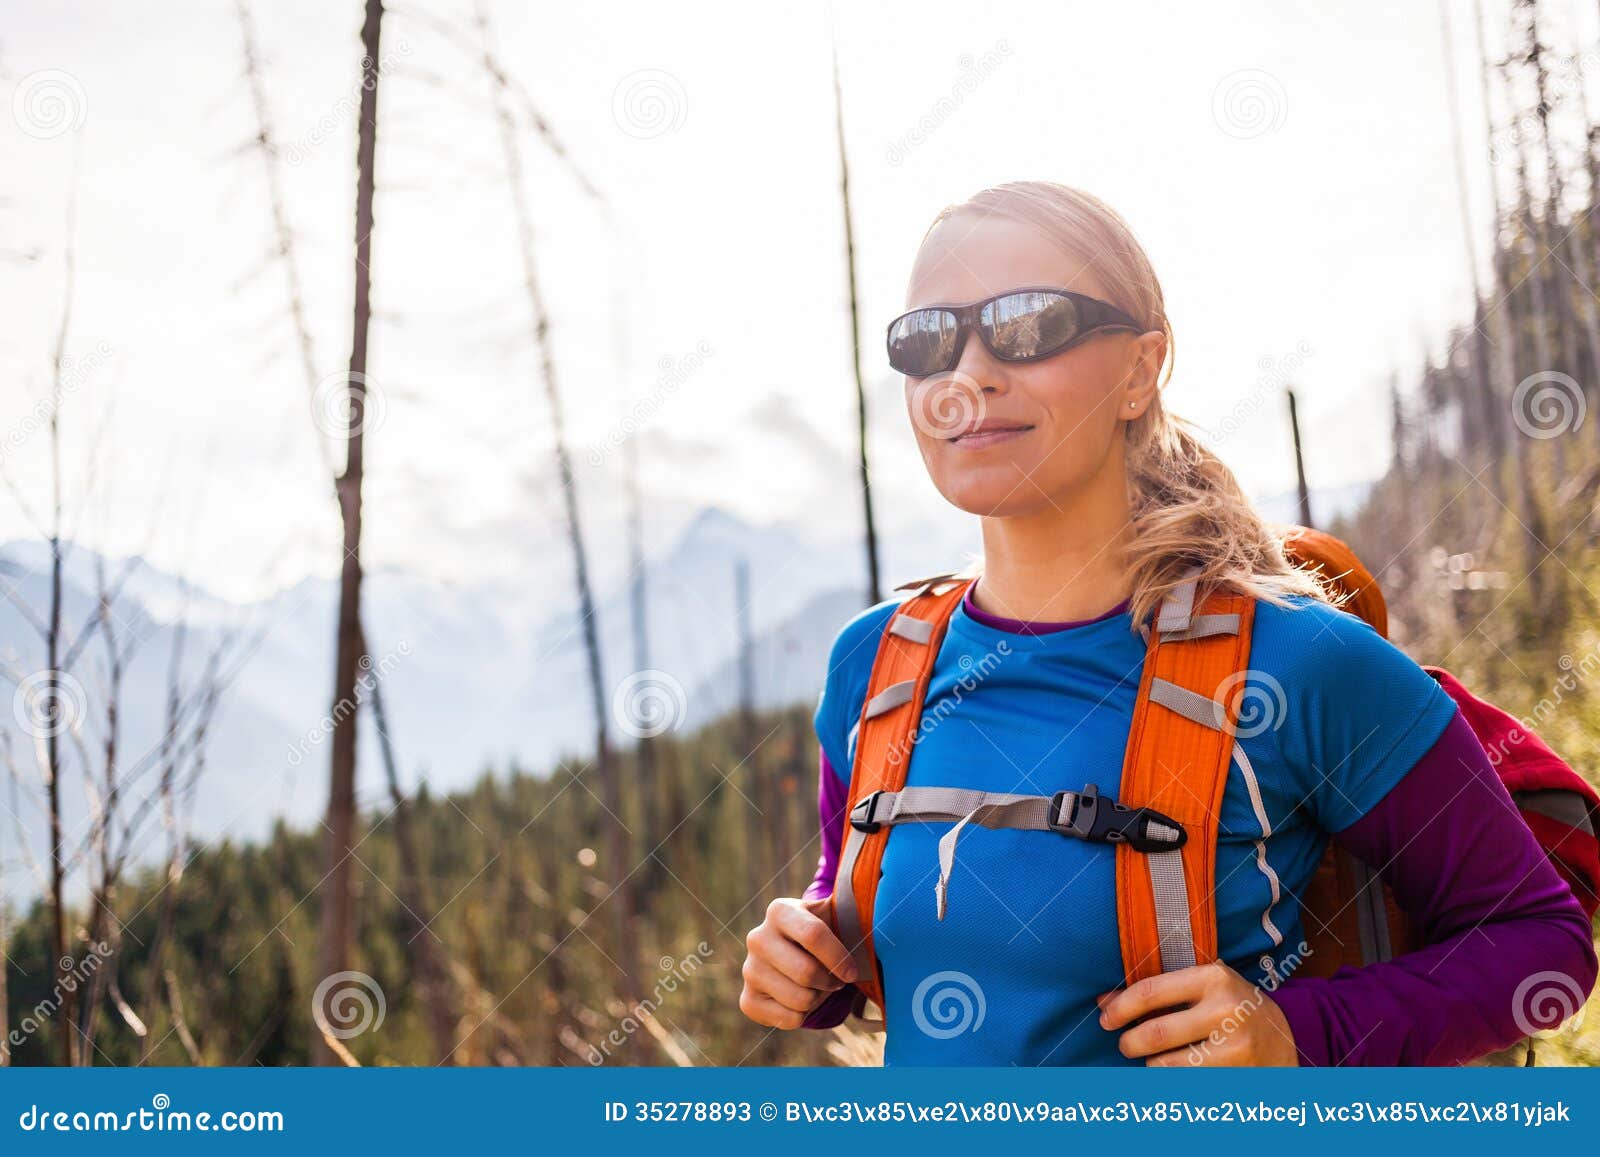 Happy Hiking Woman Giving Thumbs Up Smiling. Young Hiker Woman